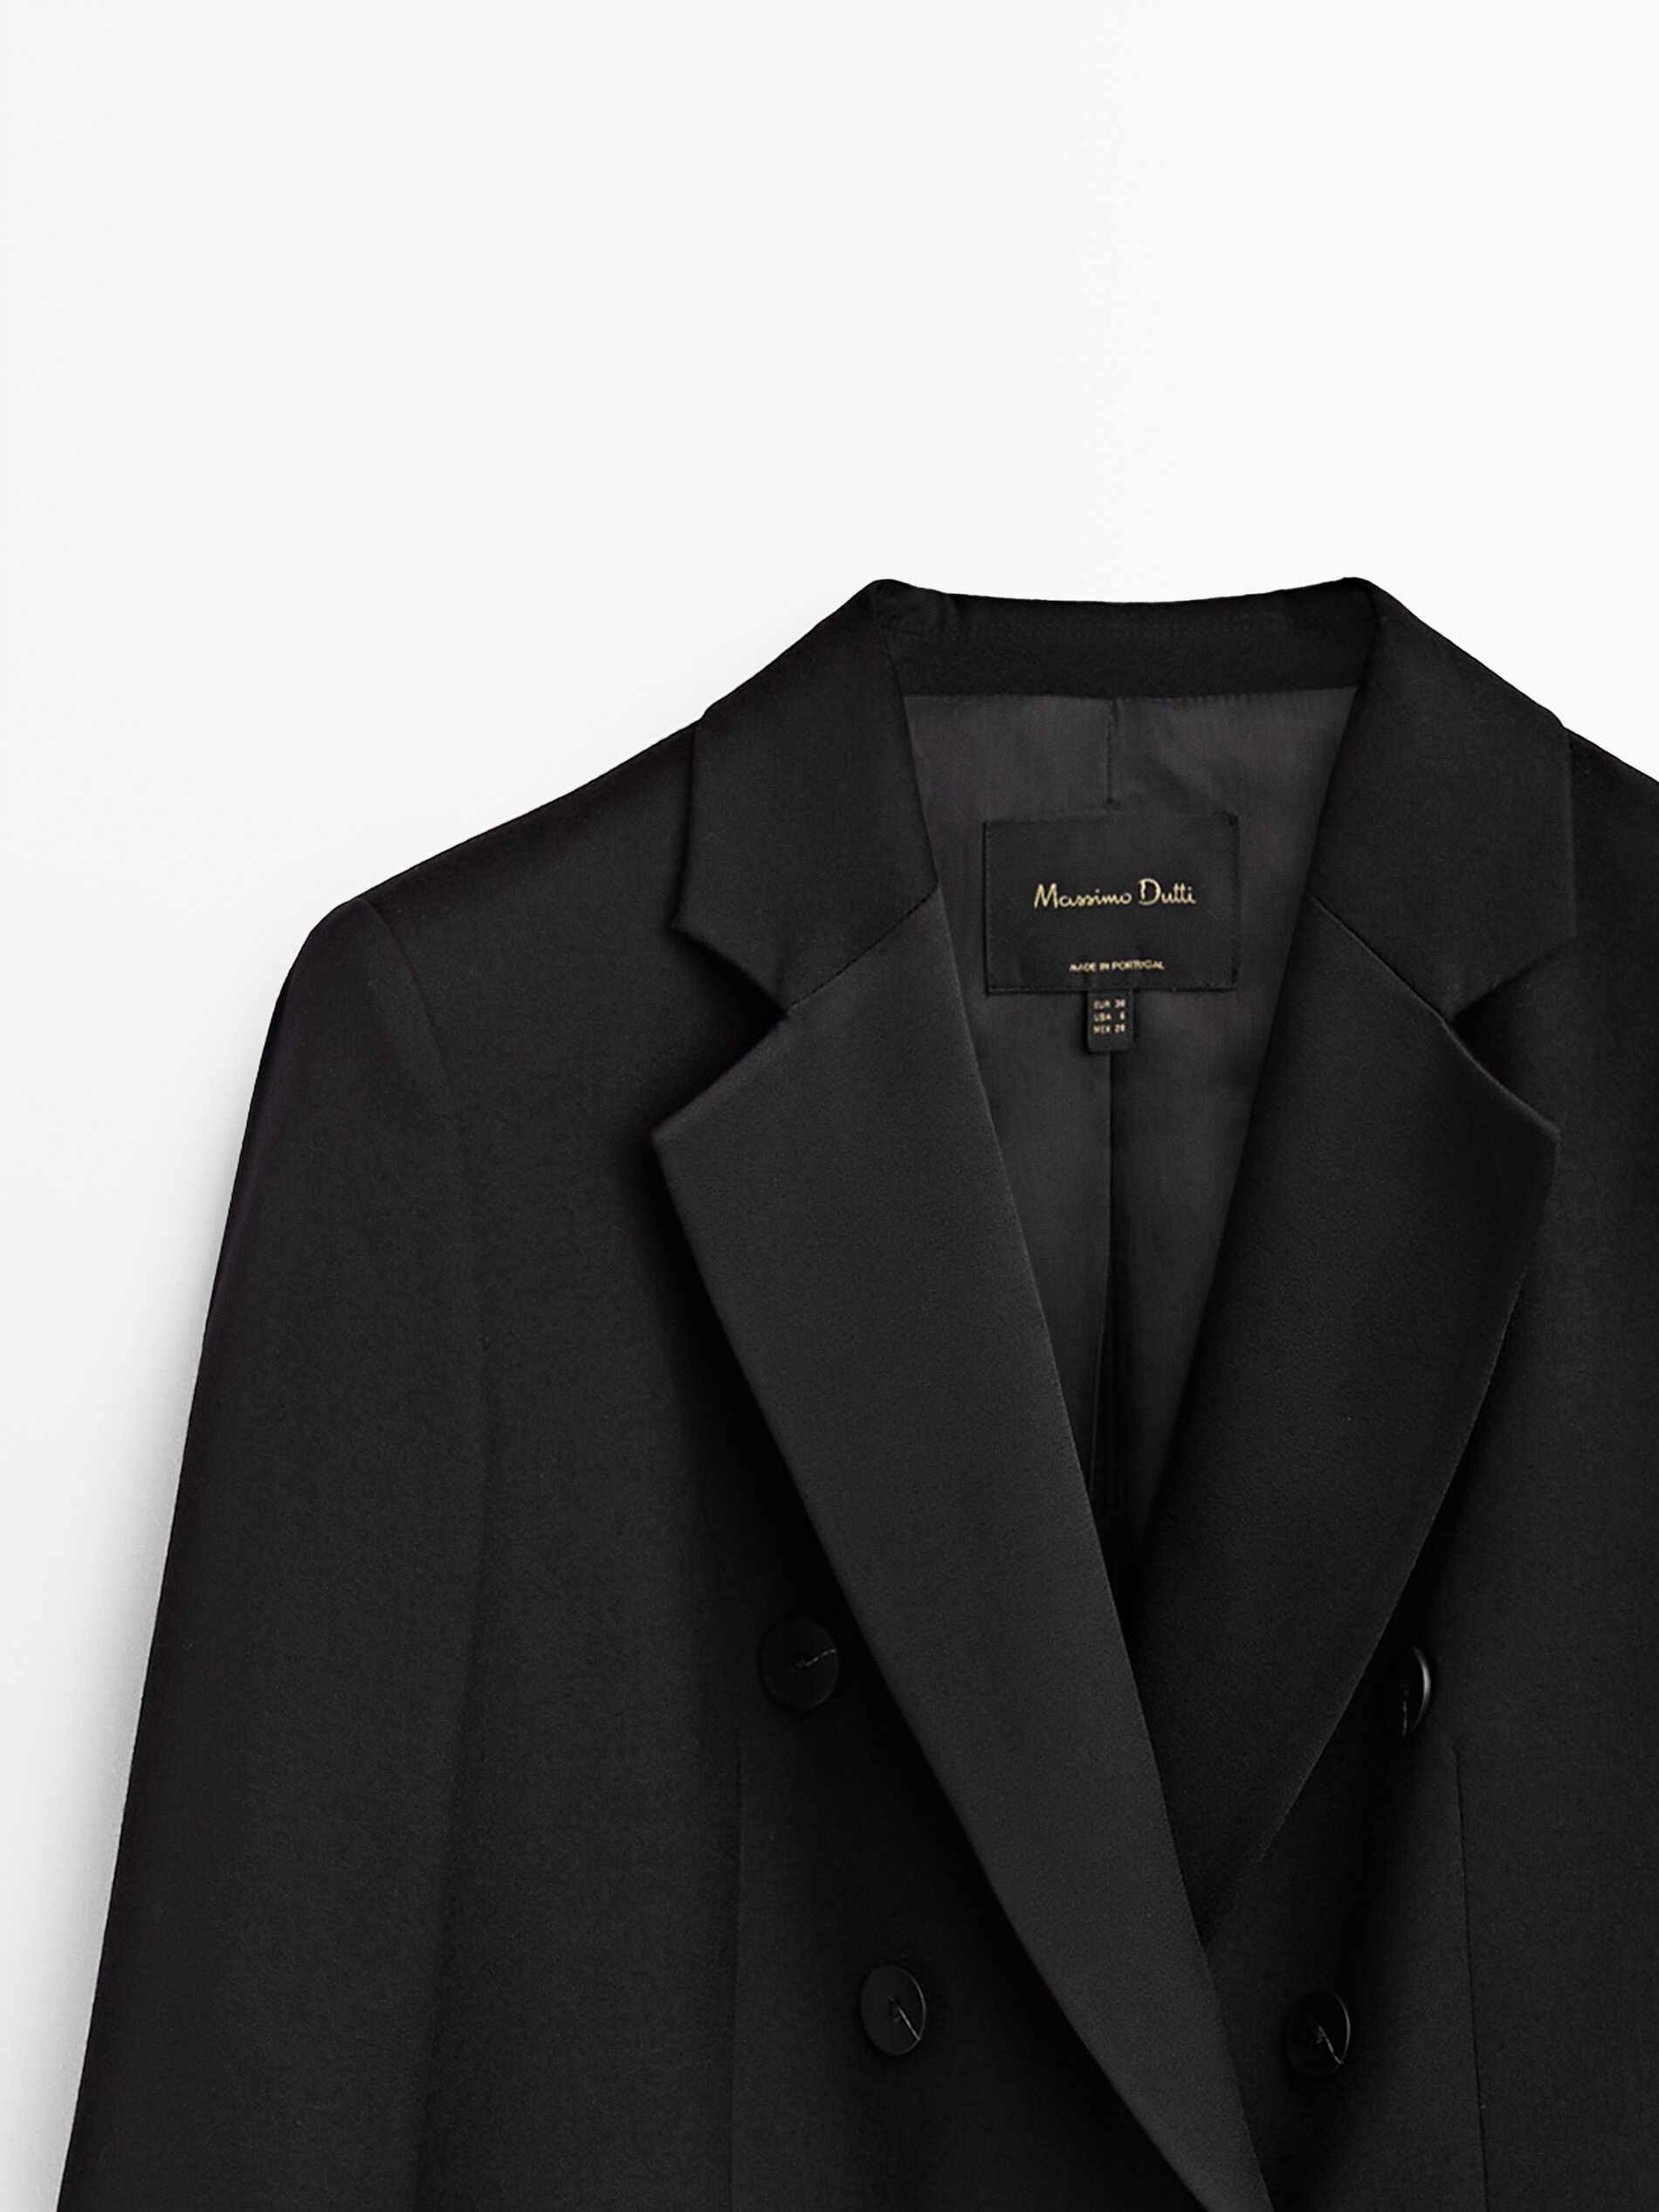 Massimo Dutti - Double-breasted wool blazer with satin lapels